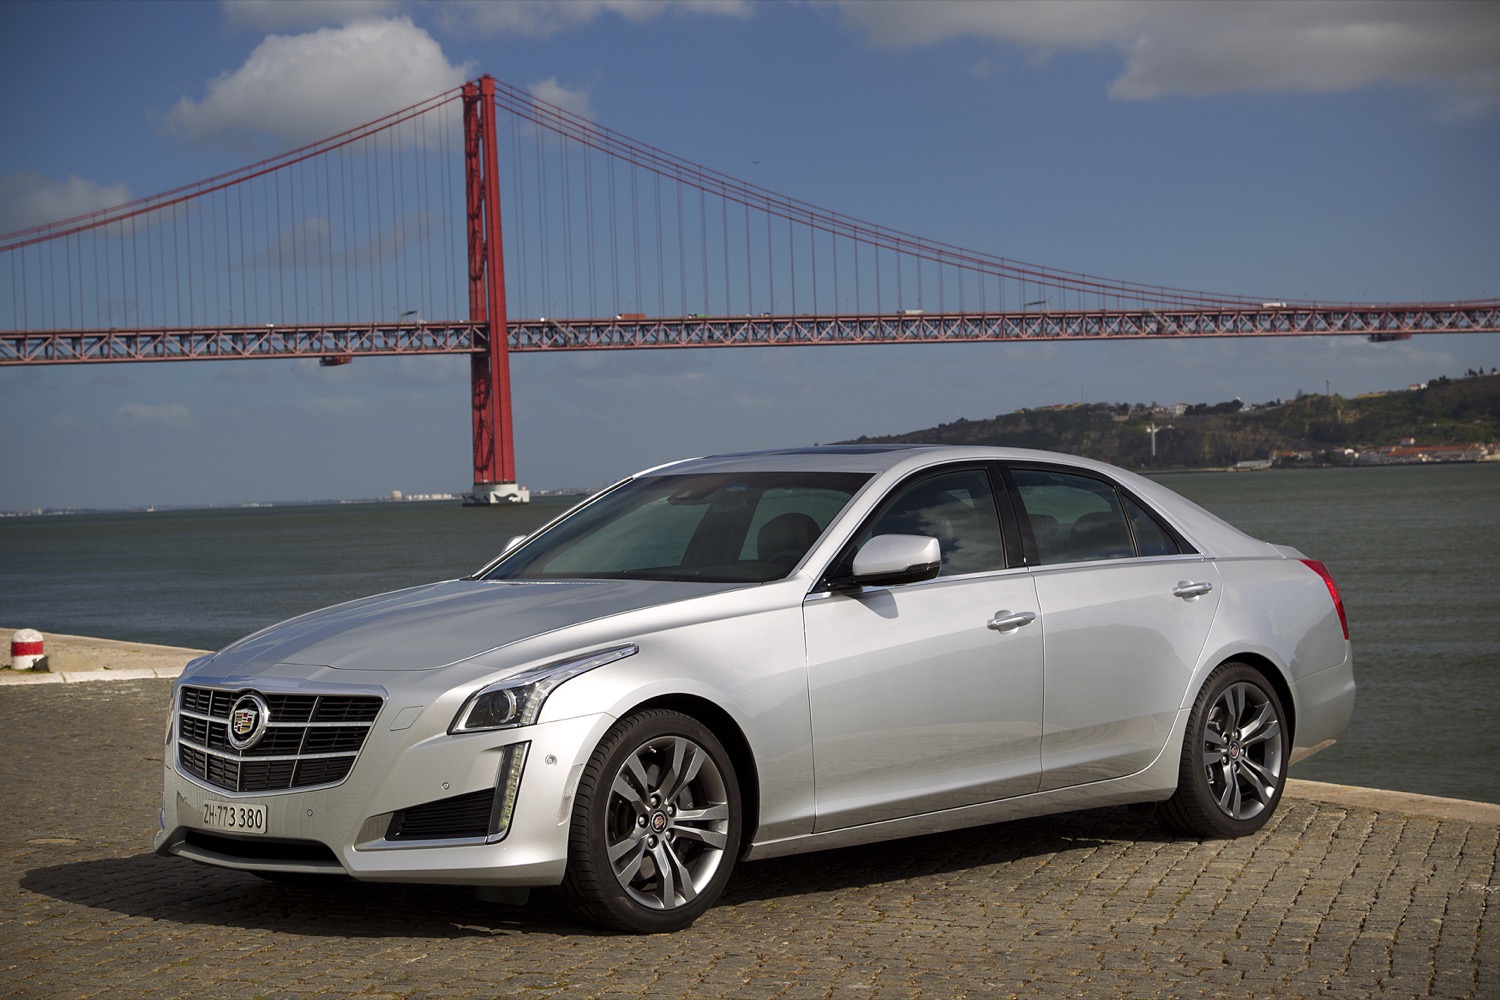 Doorweekt James Dyson alleen 2014 Cadillac CTS One Of Best Used Midsize Luxury Cars Under $20k